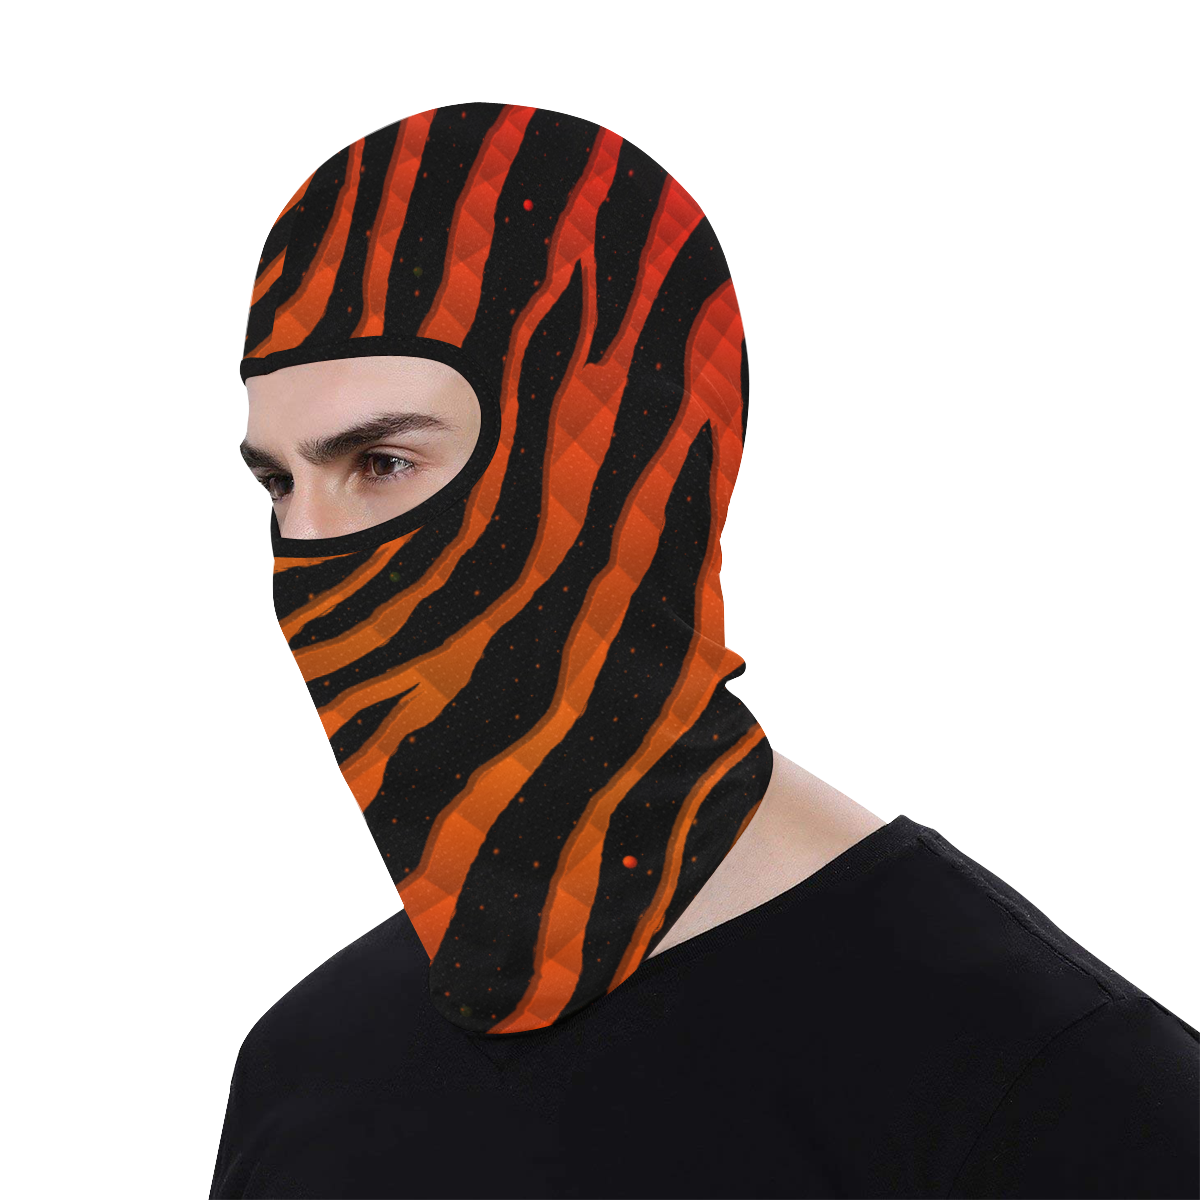 Ripped SpaceTime Stripes - Red/Orange All Over Print Balaclava